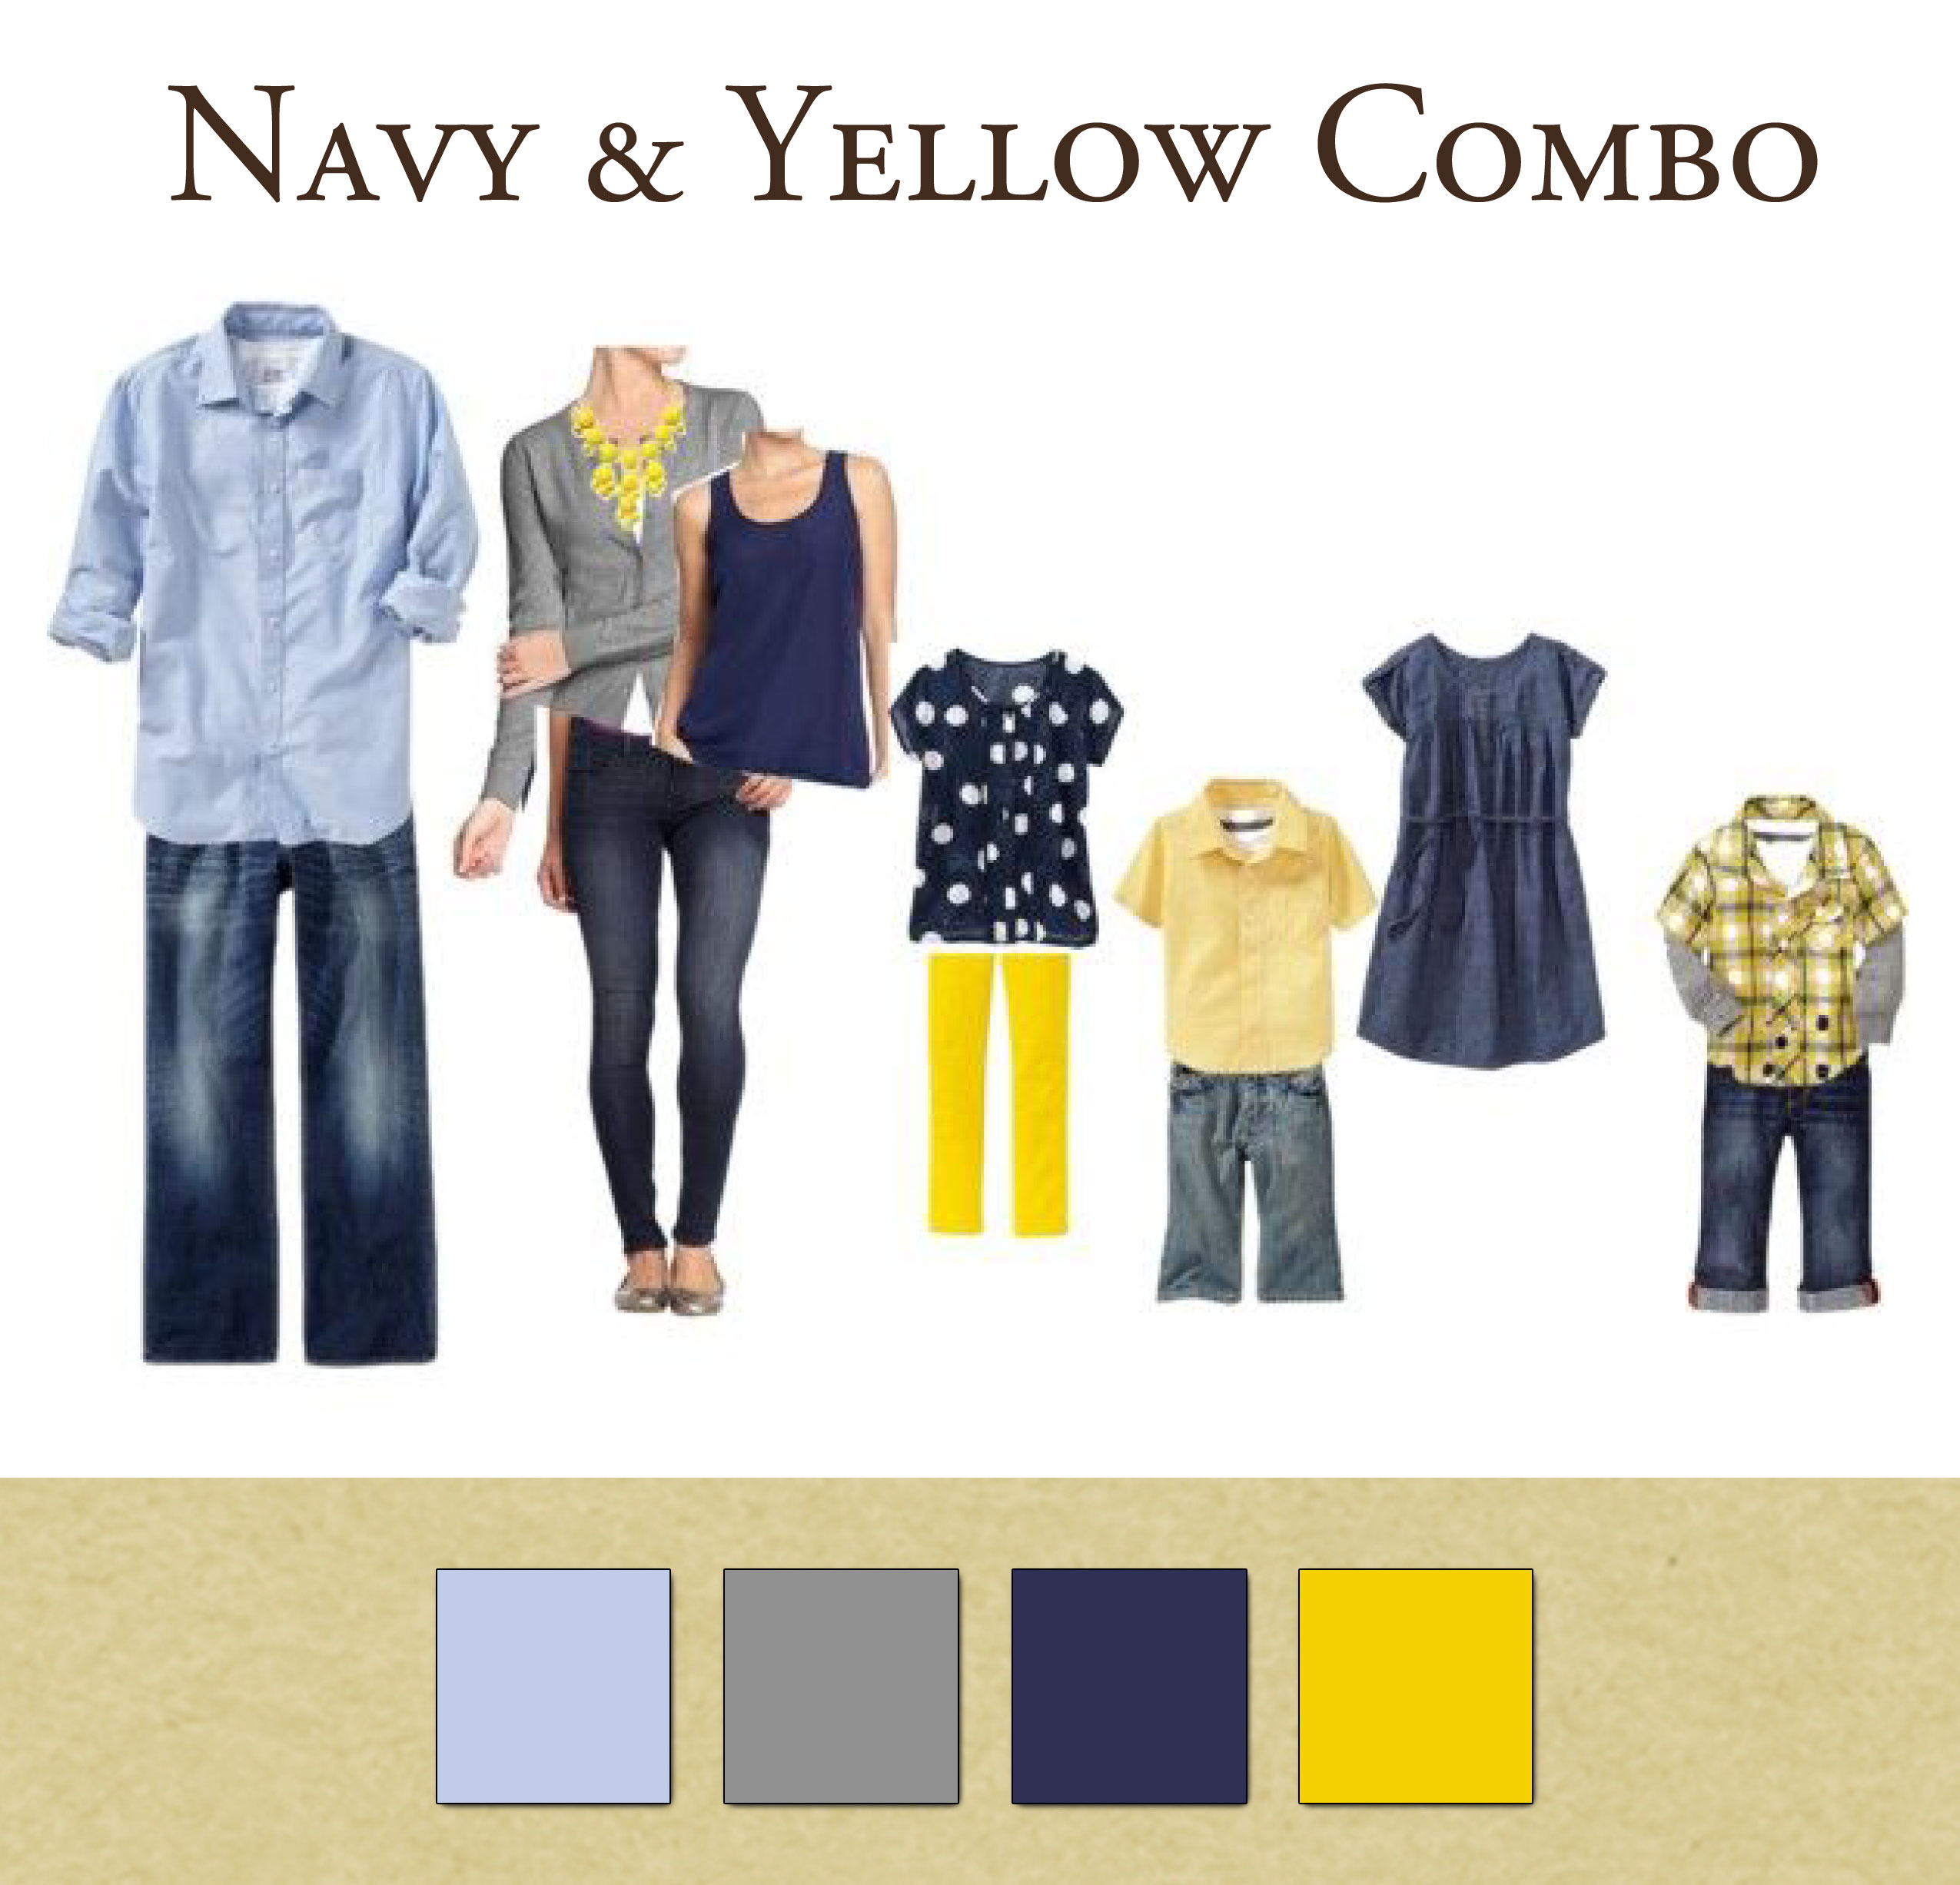 Family Outfits: Navy & Yellow Combo